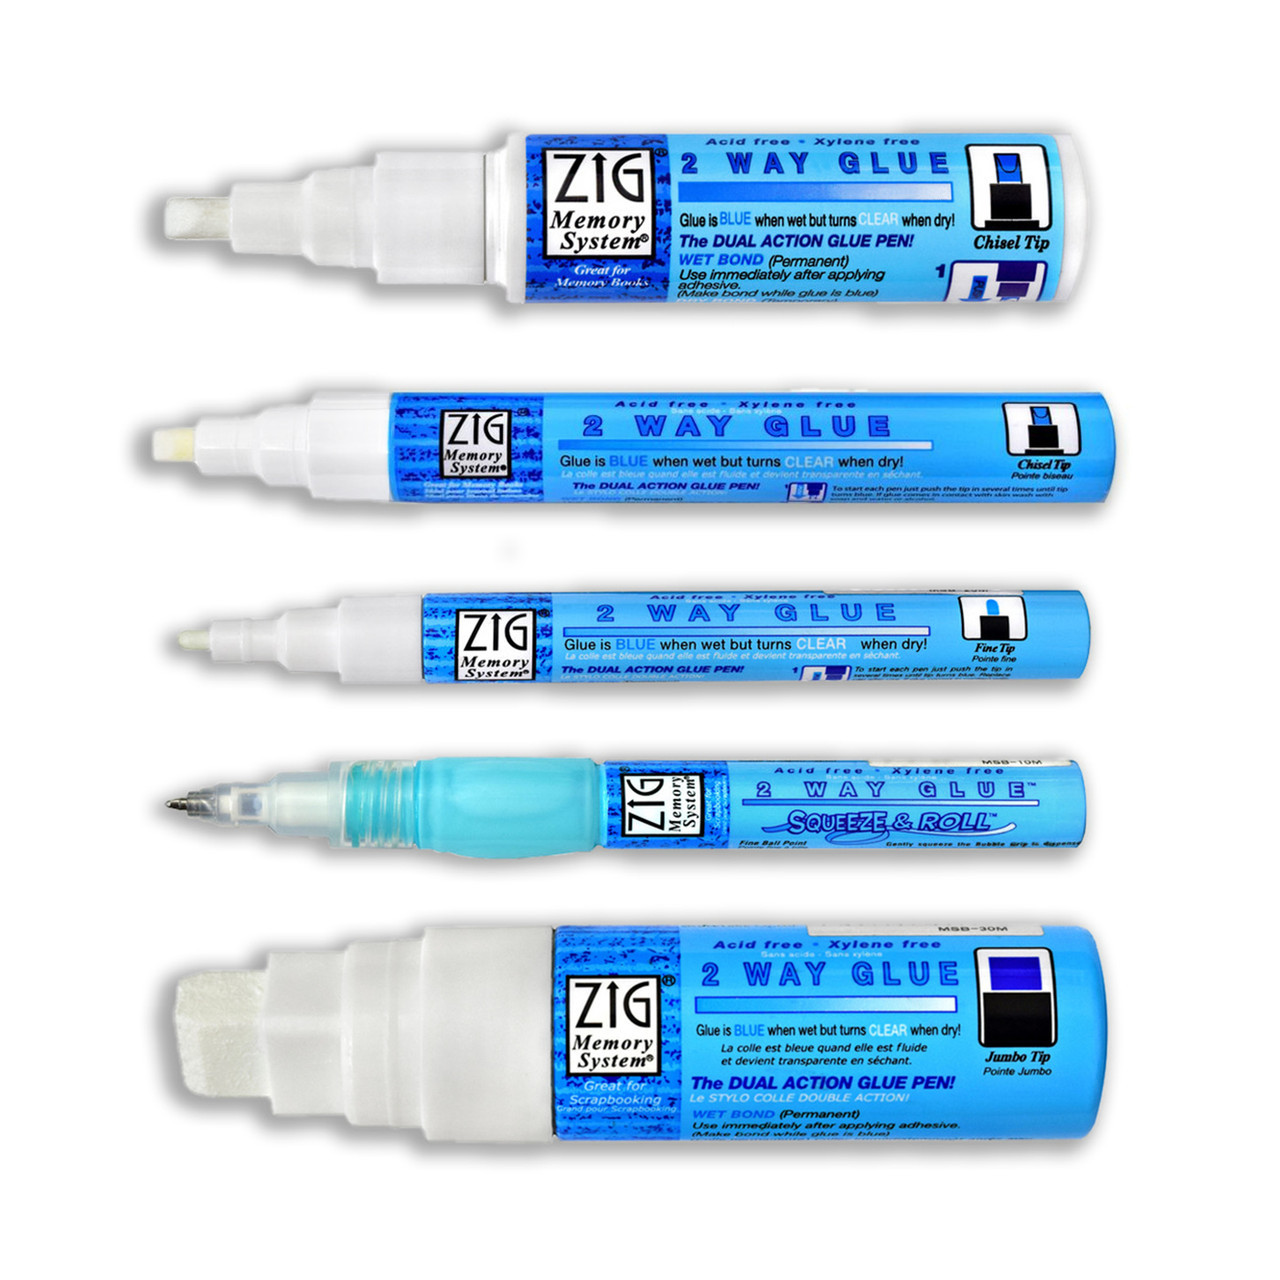 Zig MSB30M1P Memory System Two Way Glue Pen, Carded, Jumbo Tip